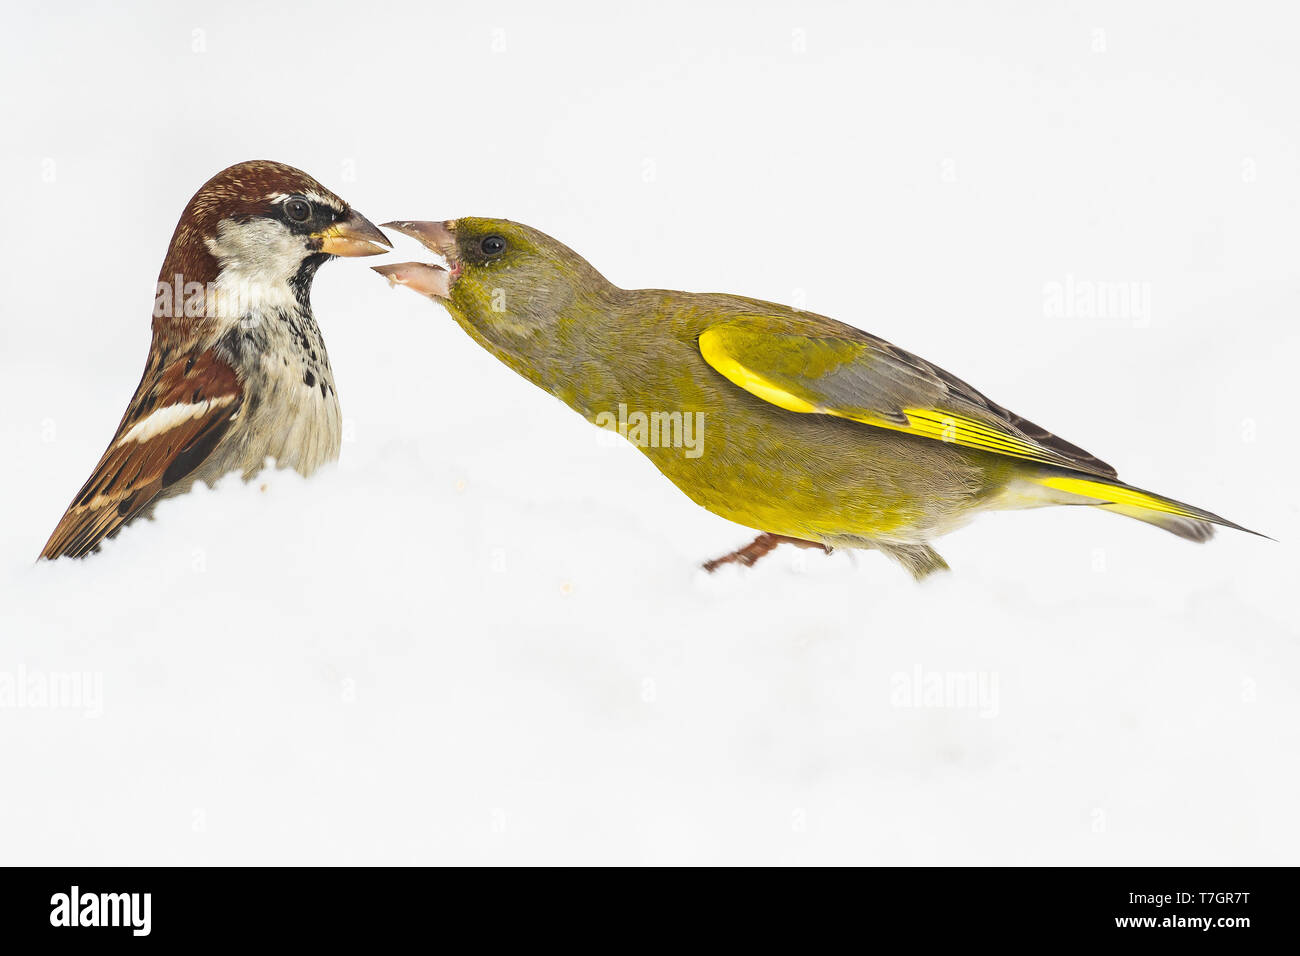 European Greenfinch fighting with a male house sparrow Stock Photo